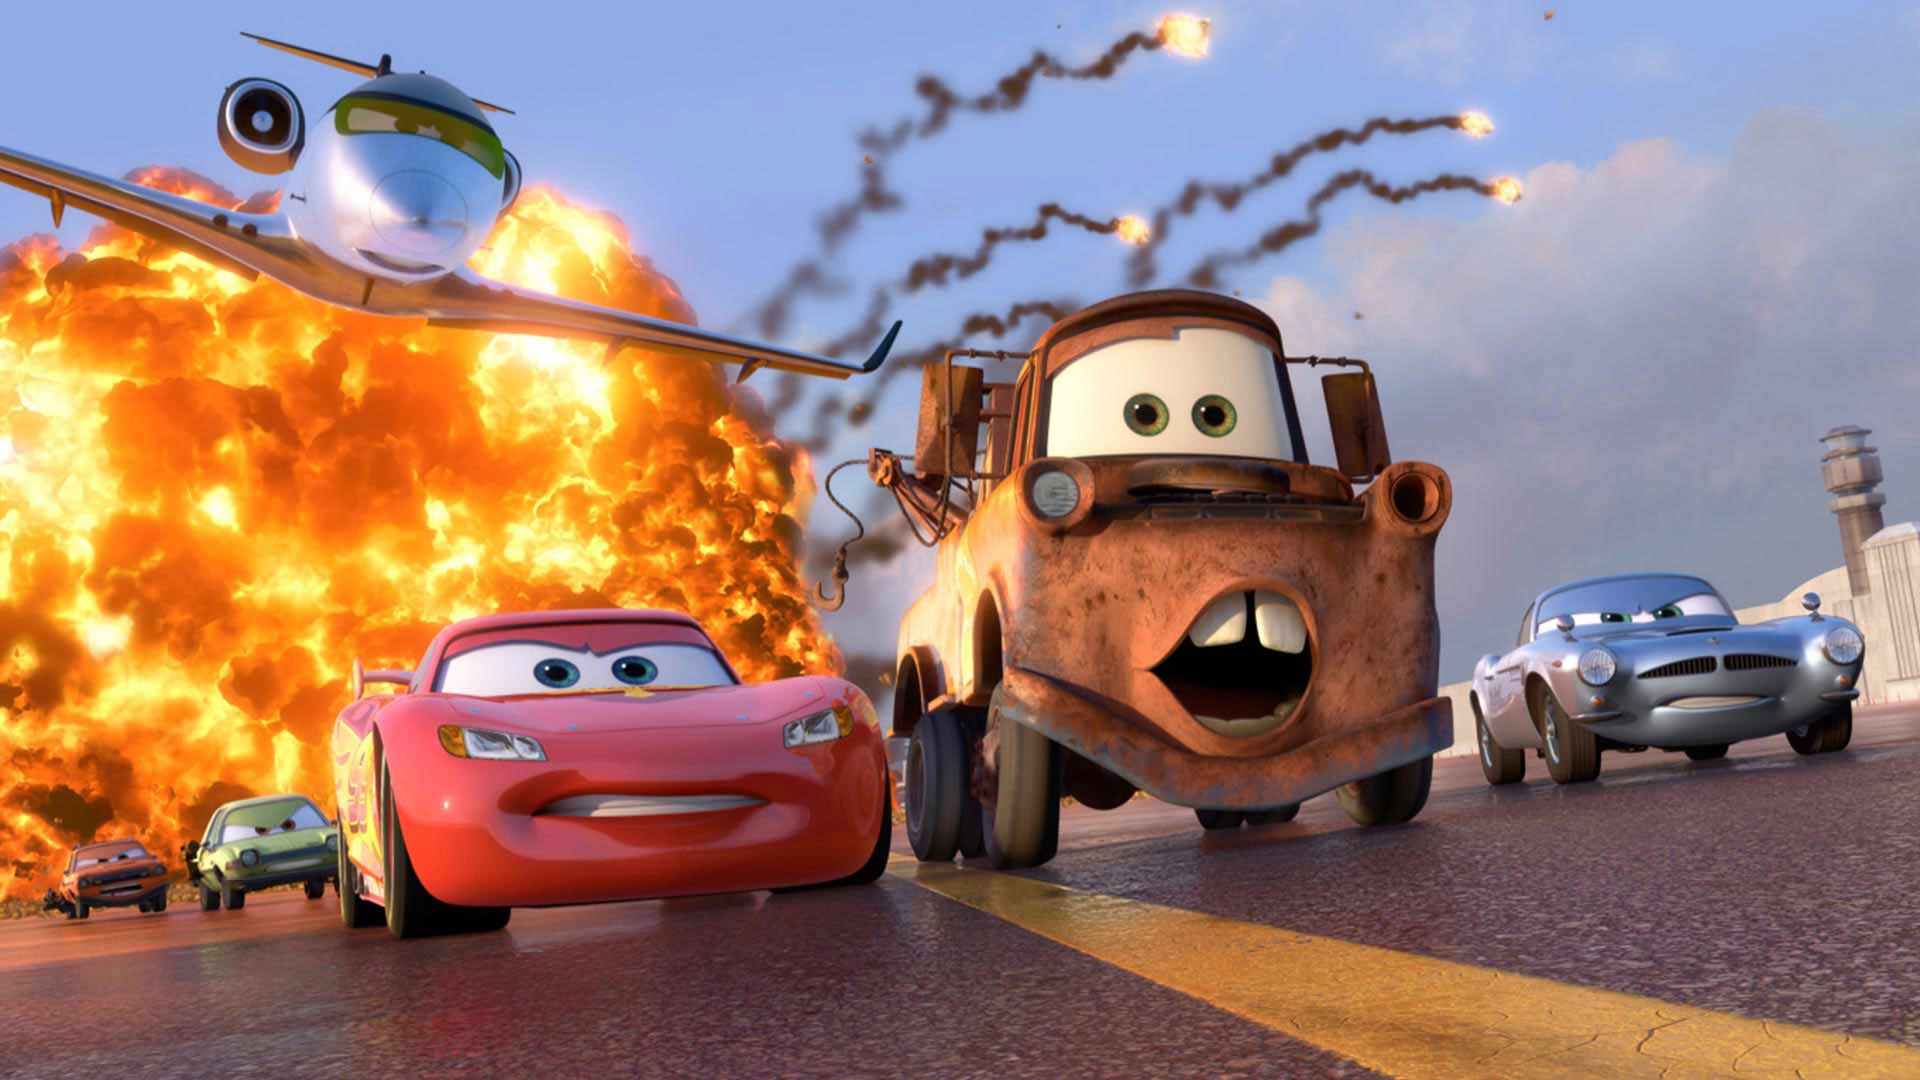 Mater is running away from the pursuers in the car animation